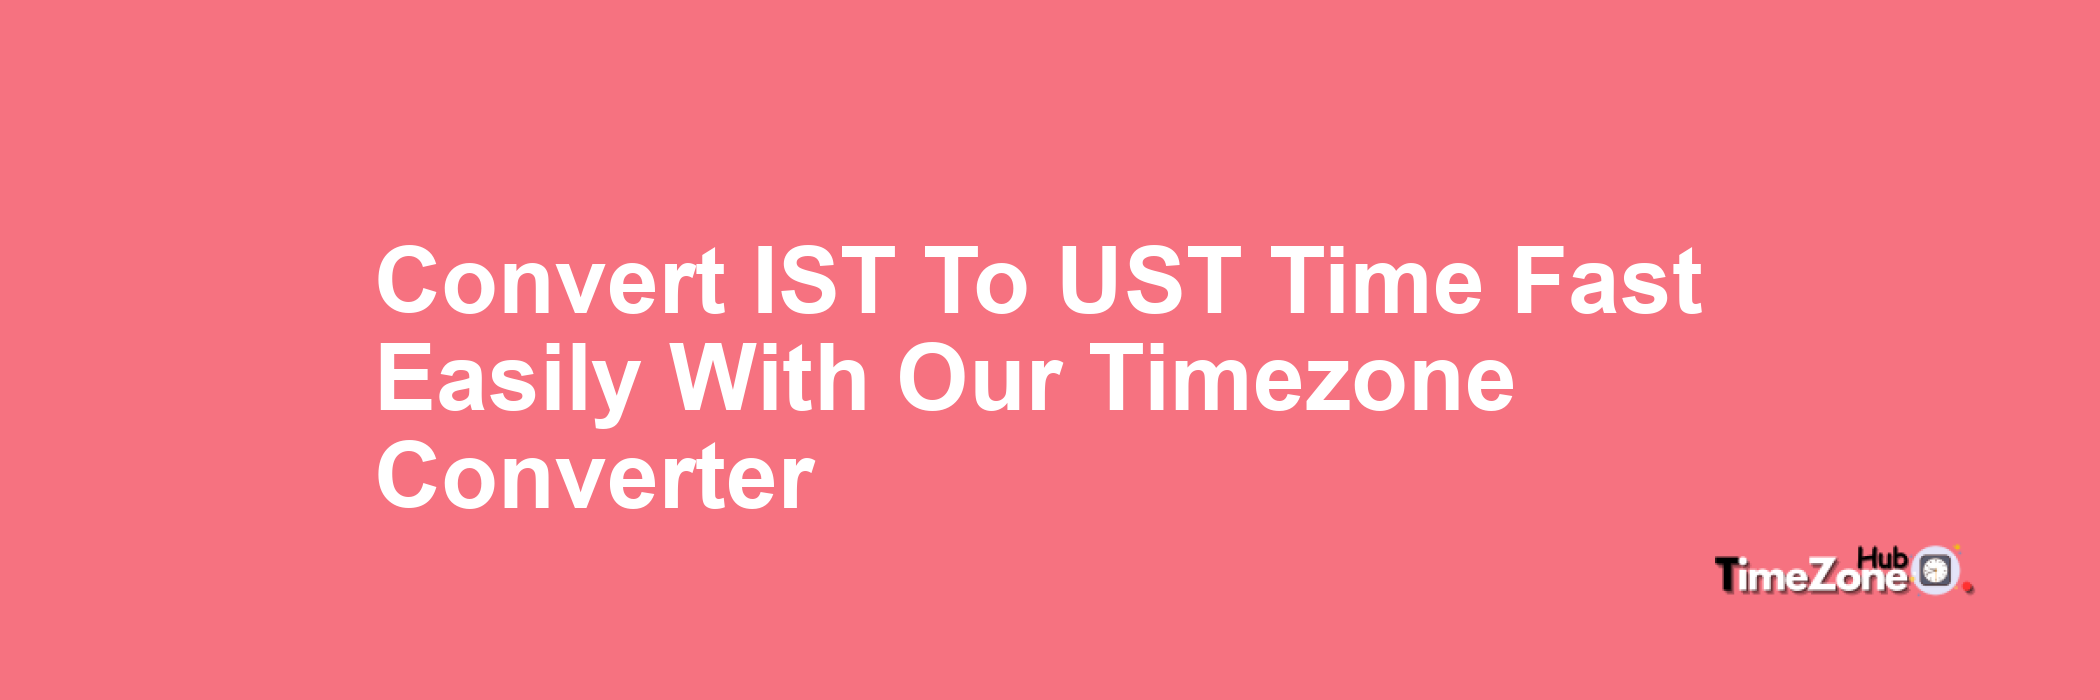 IST to UST